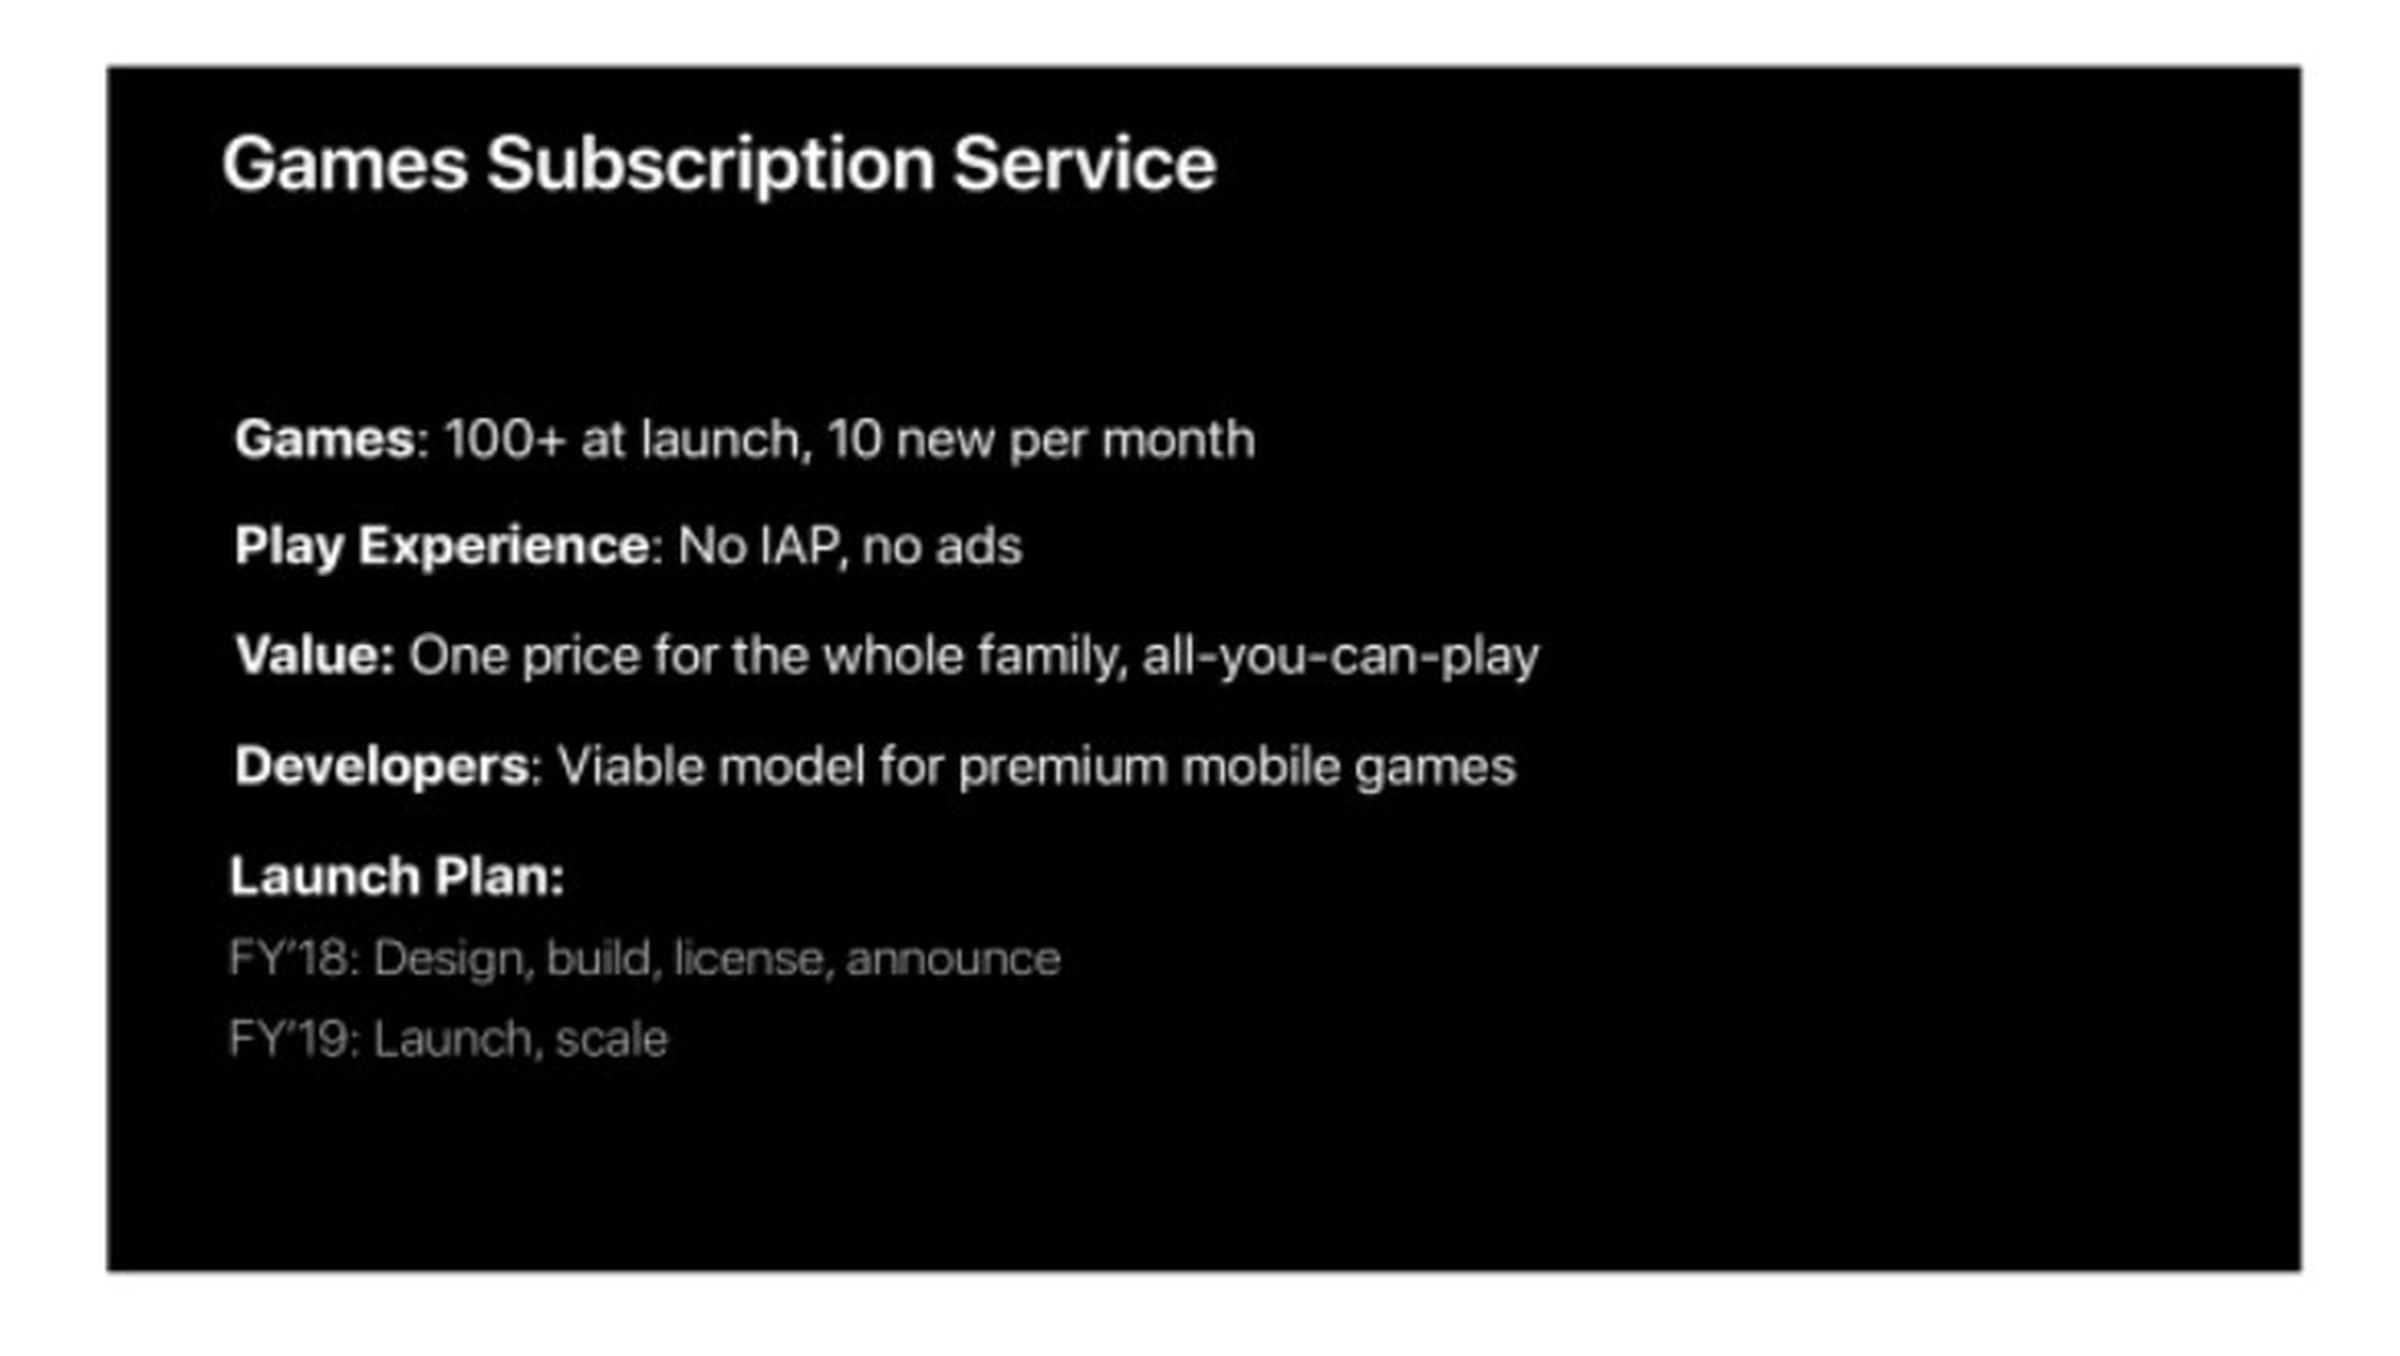 Apple describes its “game subscription service,” which would launch as Apple Arcade